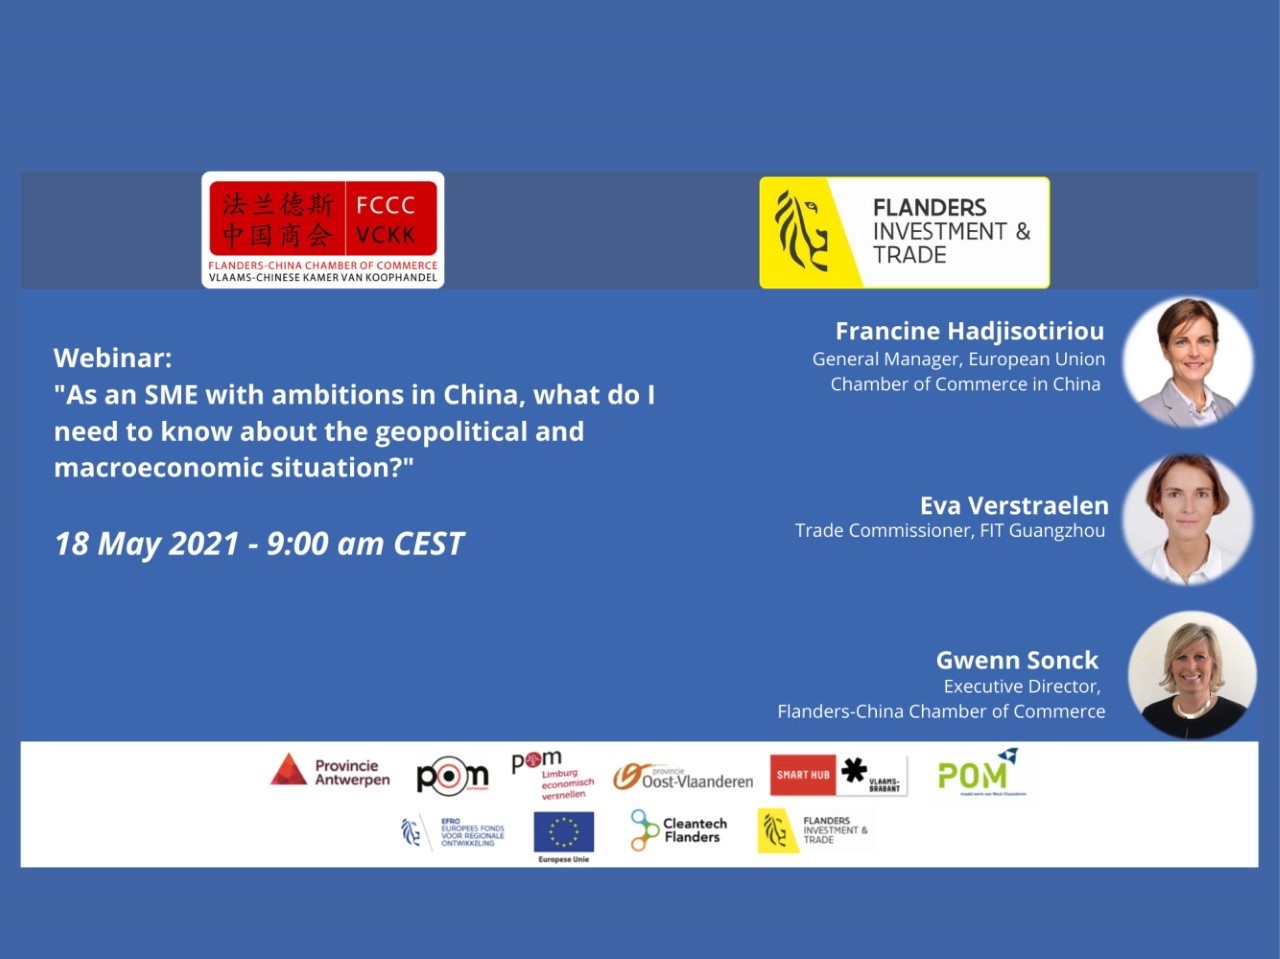 Webinar: “As an SME with ambitions in China, what do I need to know about the geopolitical and macroeconomic situation?”